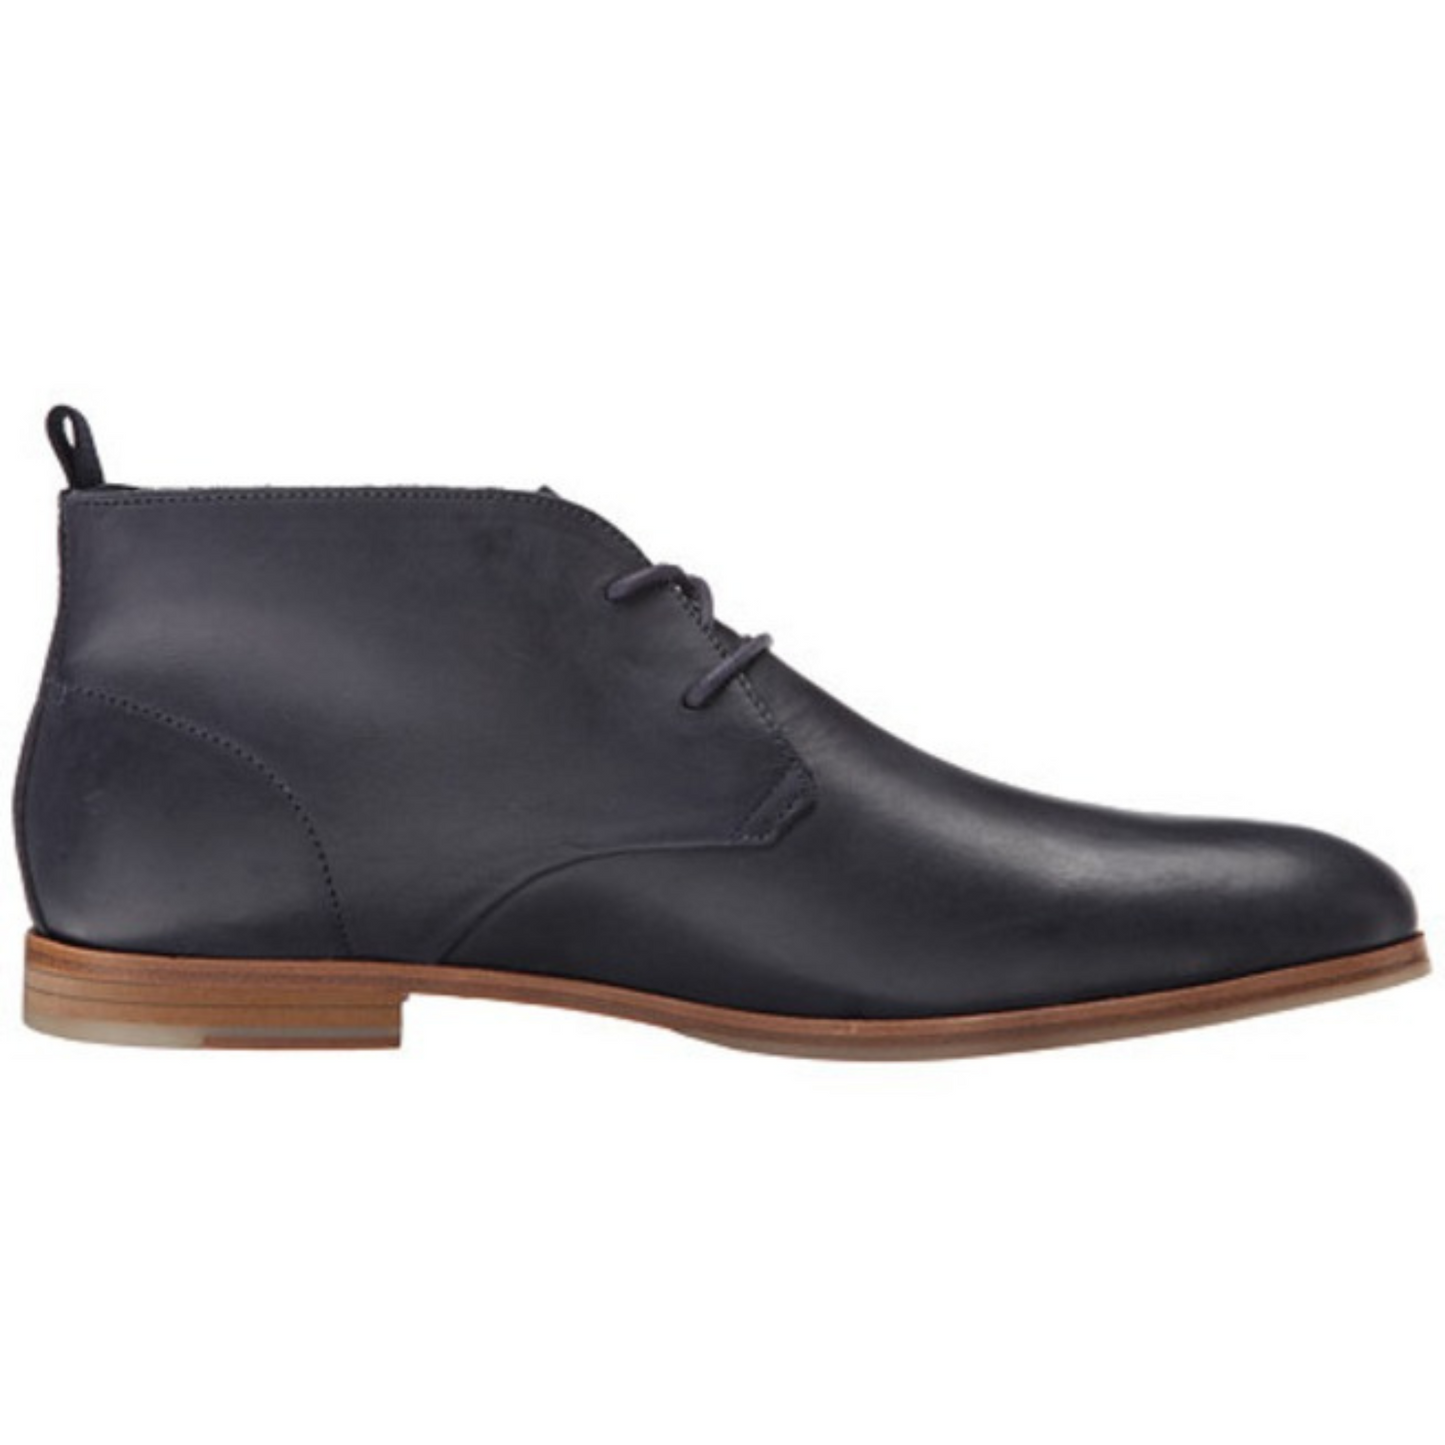 Tailor Made Handmade Bespoke Ankle Black Chukka Leather Boots